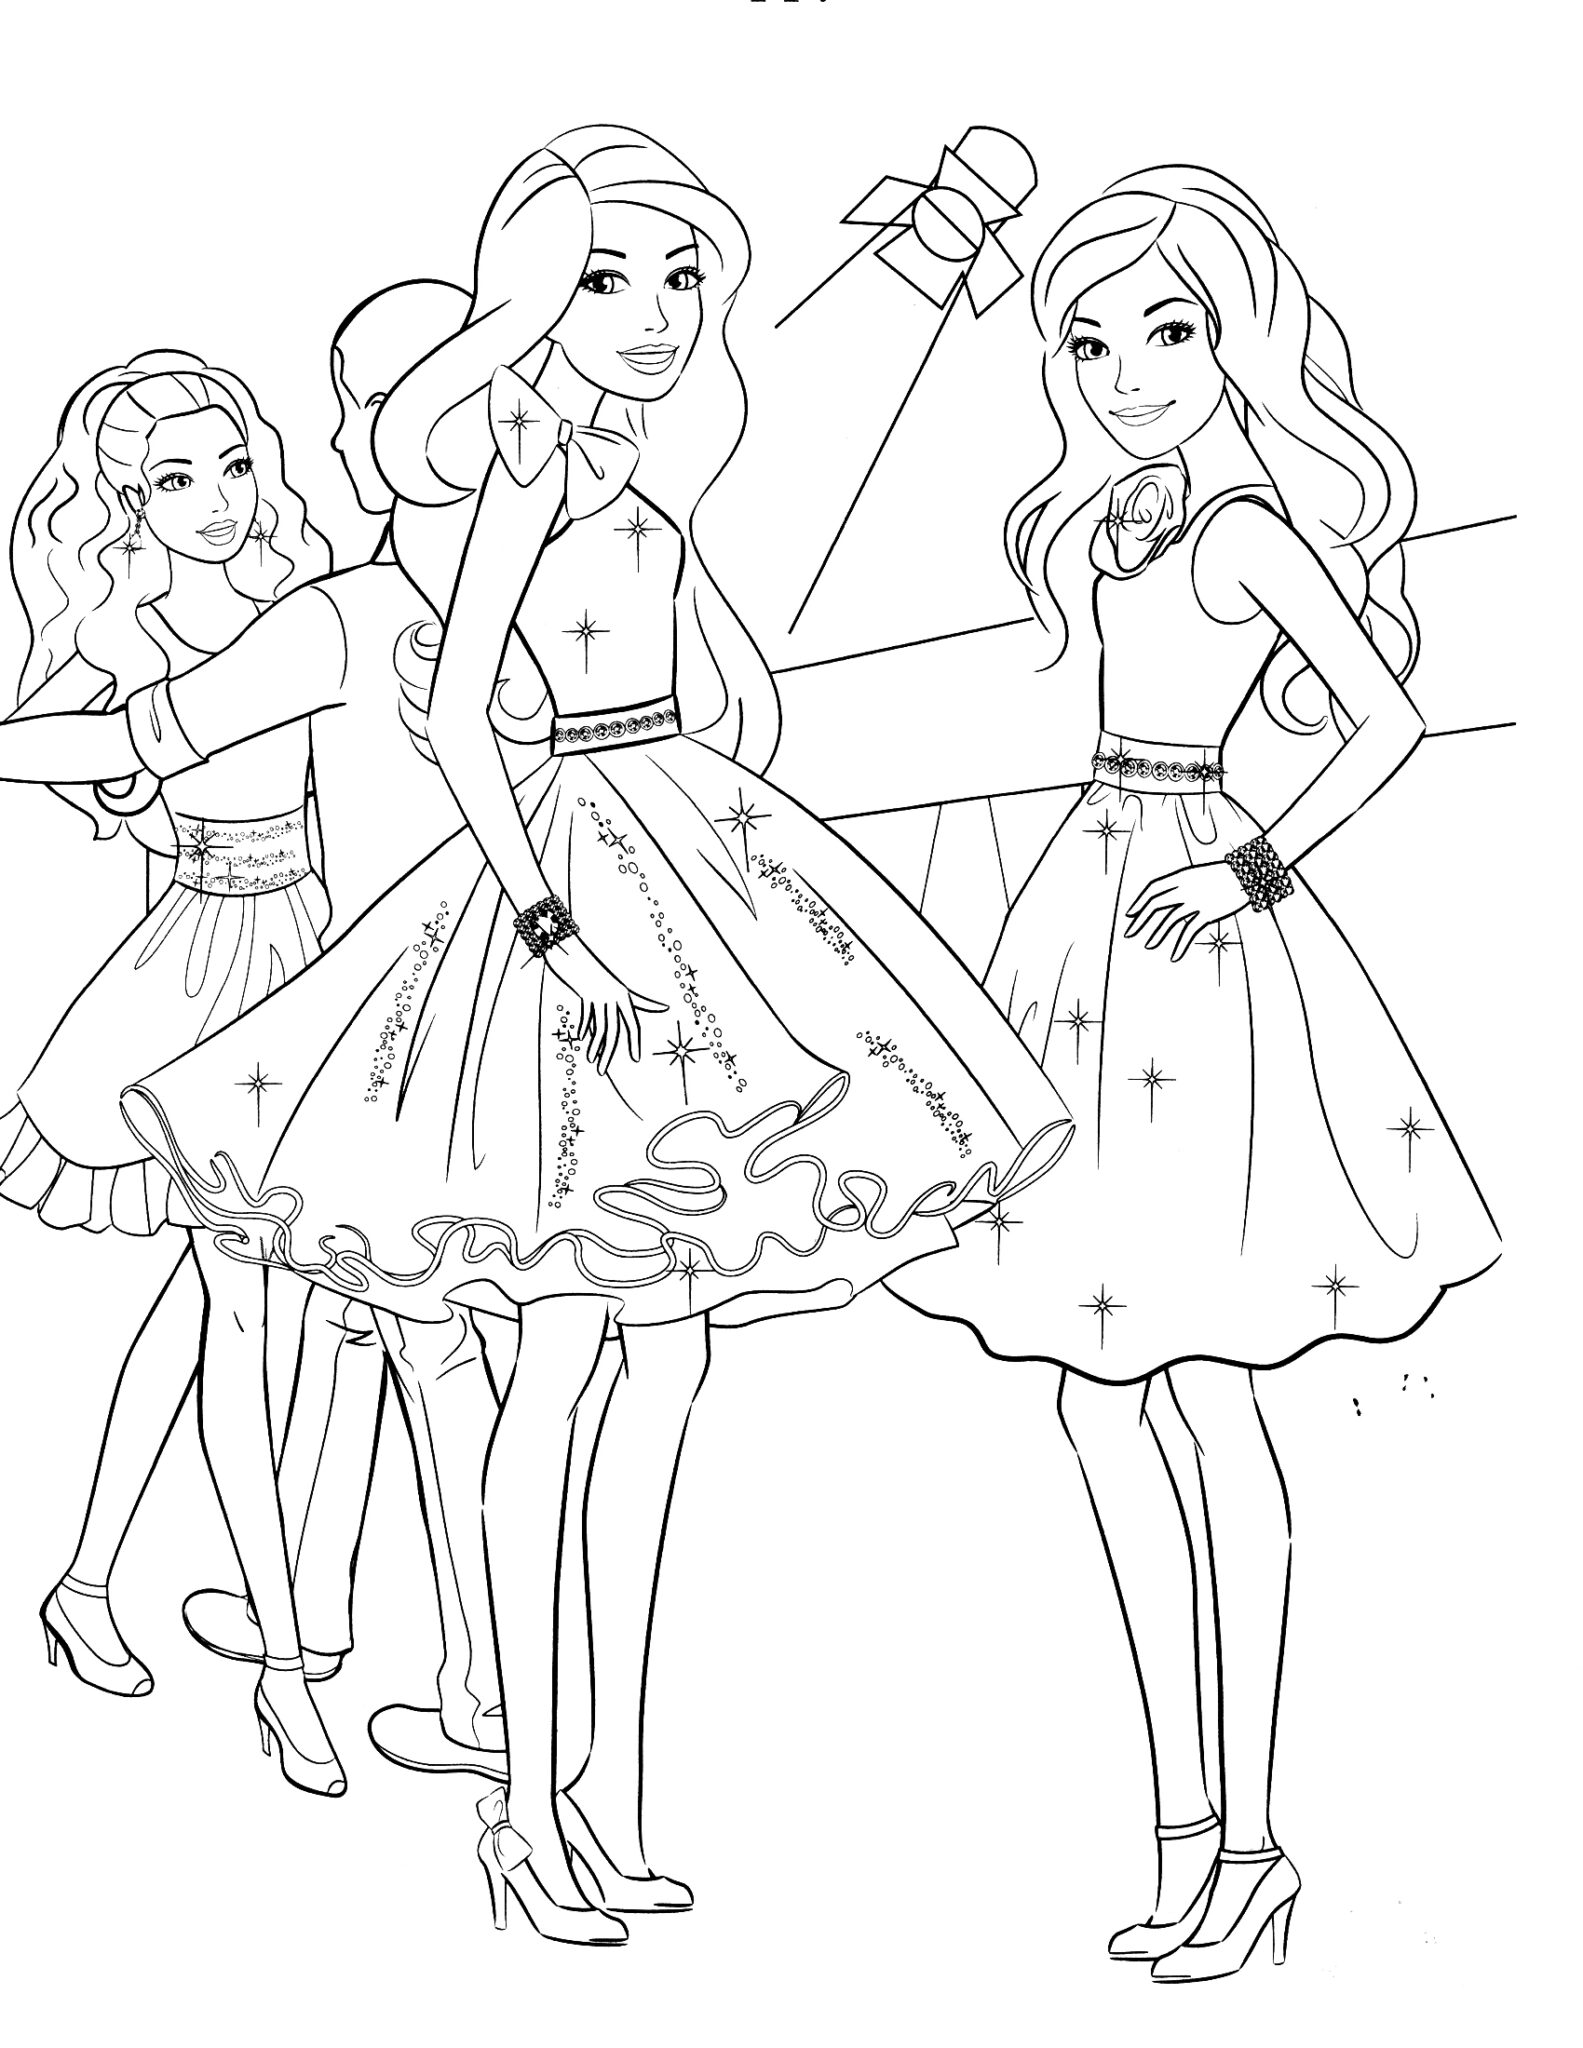 Party Coloring Pages - Best Coloring Pages For Kids